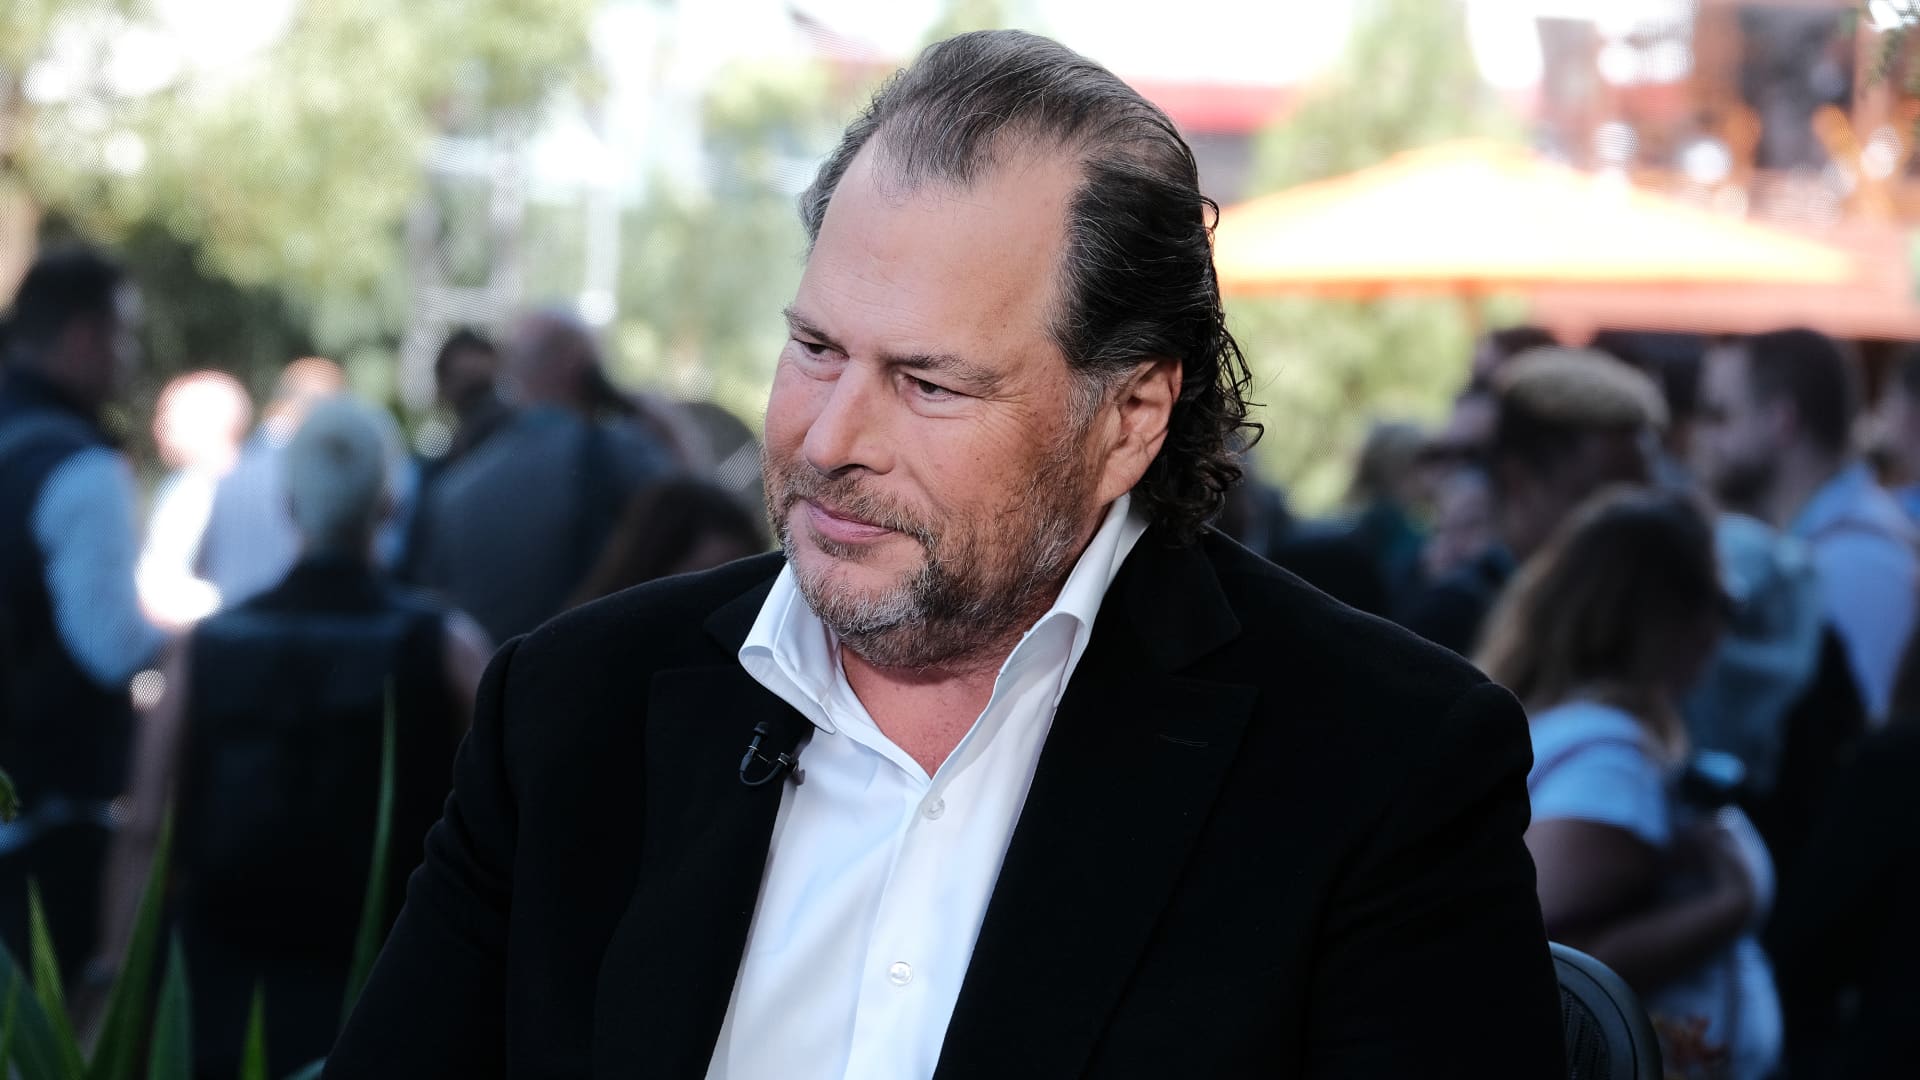 Salesforce stock on pace for worst day since 2008